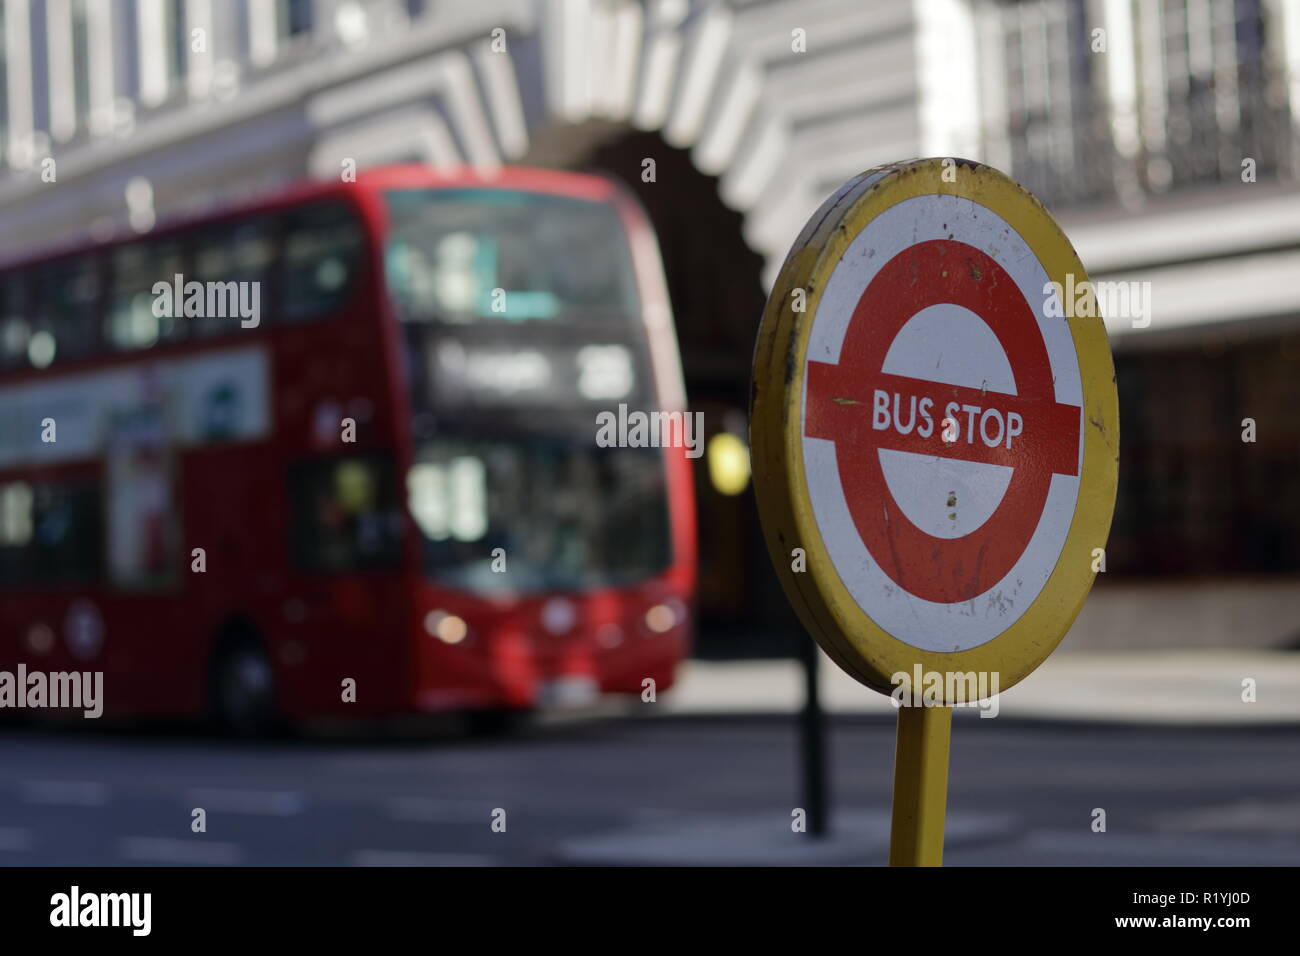 Bus stop sign with red bus on the background. Picture taken on regents street in London. Stock Photo